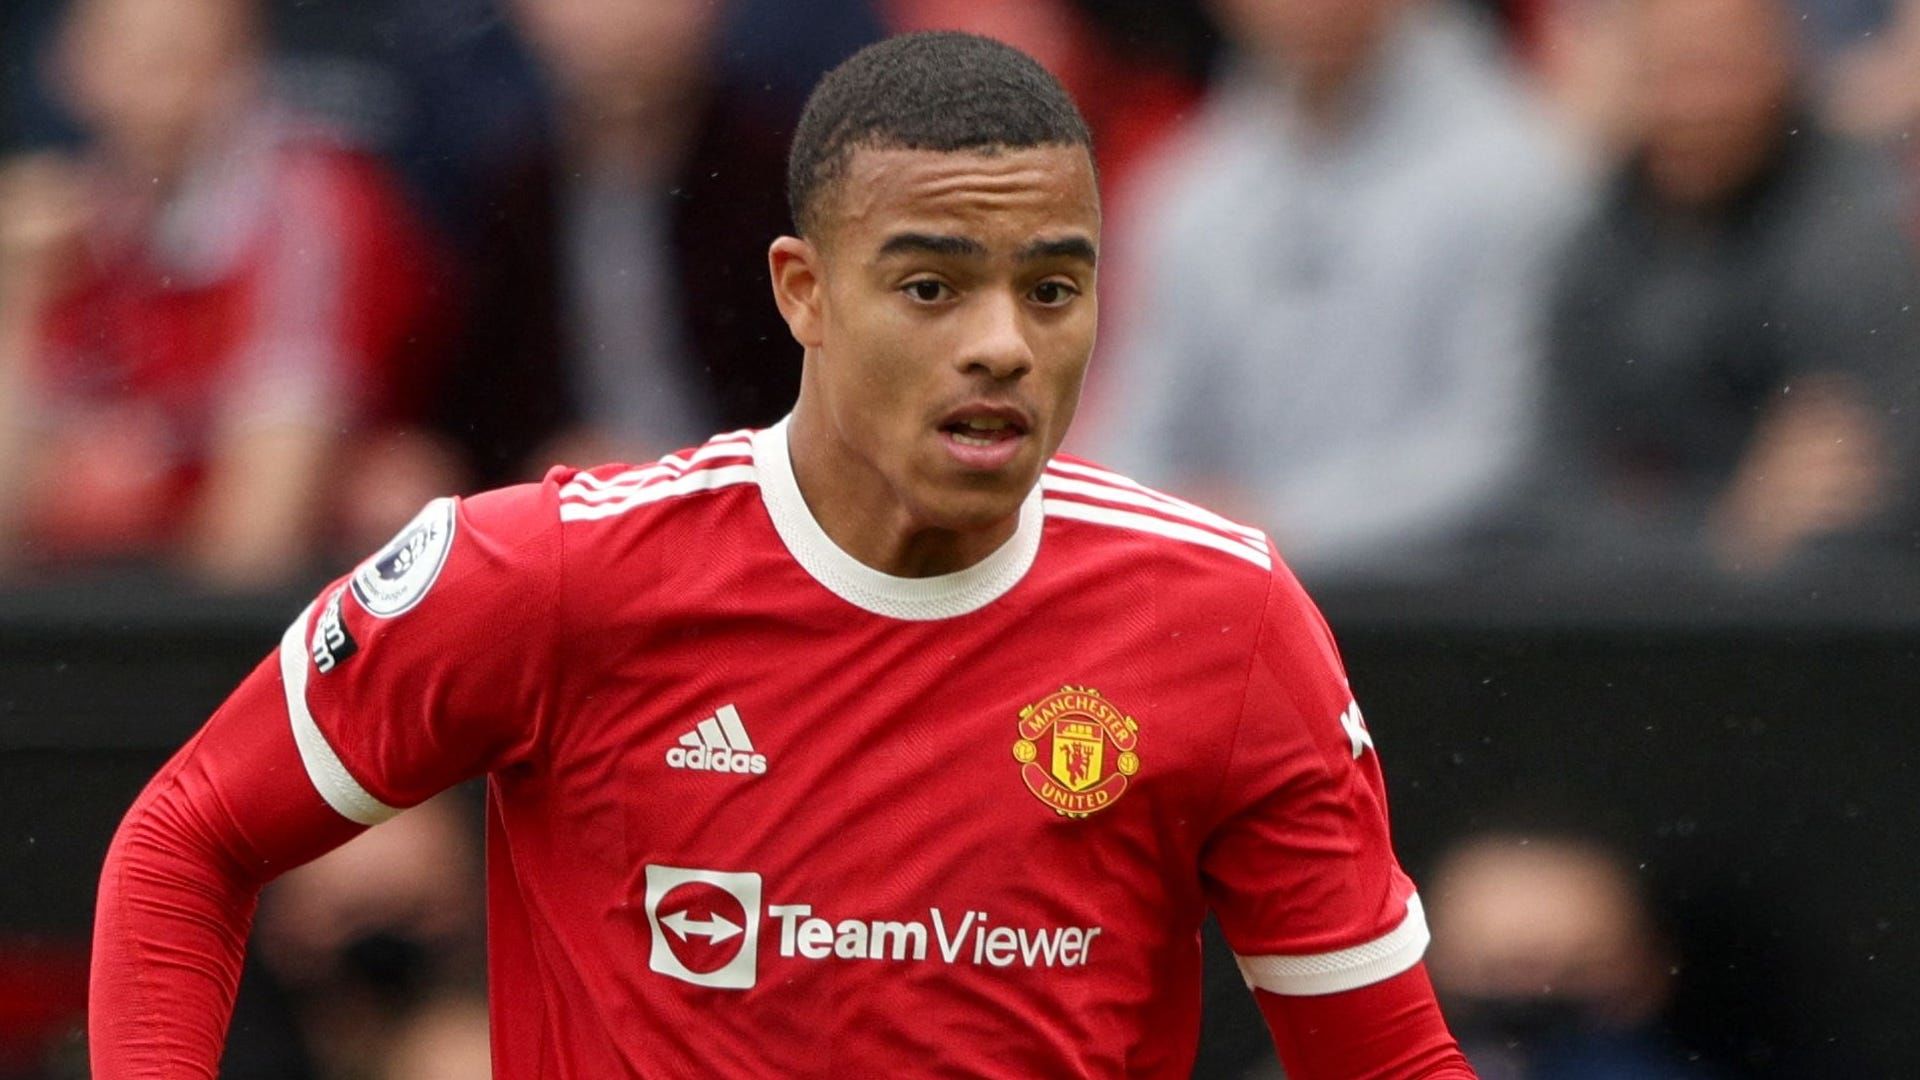 Man Utd expects to complete internal investigation into Greenwood before end of season